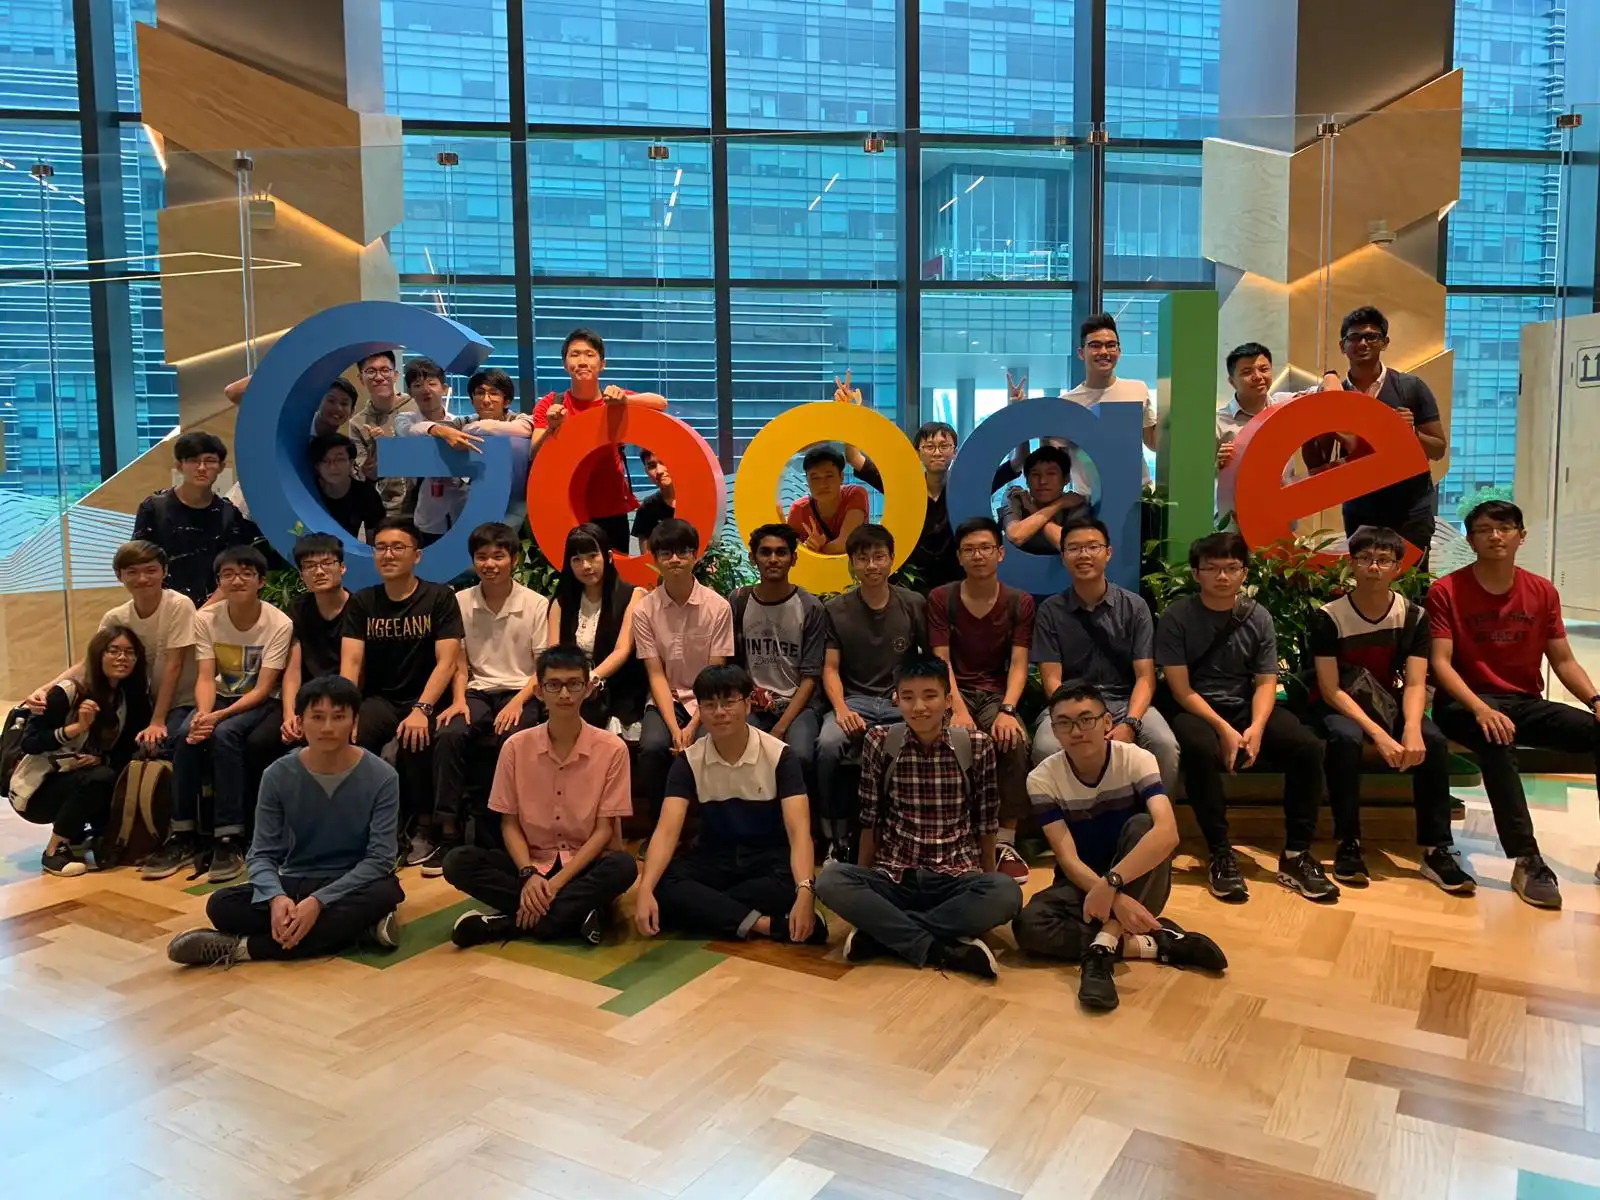 A group of people sitting in a room, with the words "Google" in the middle.